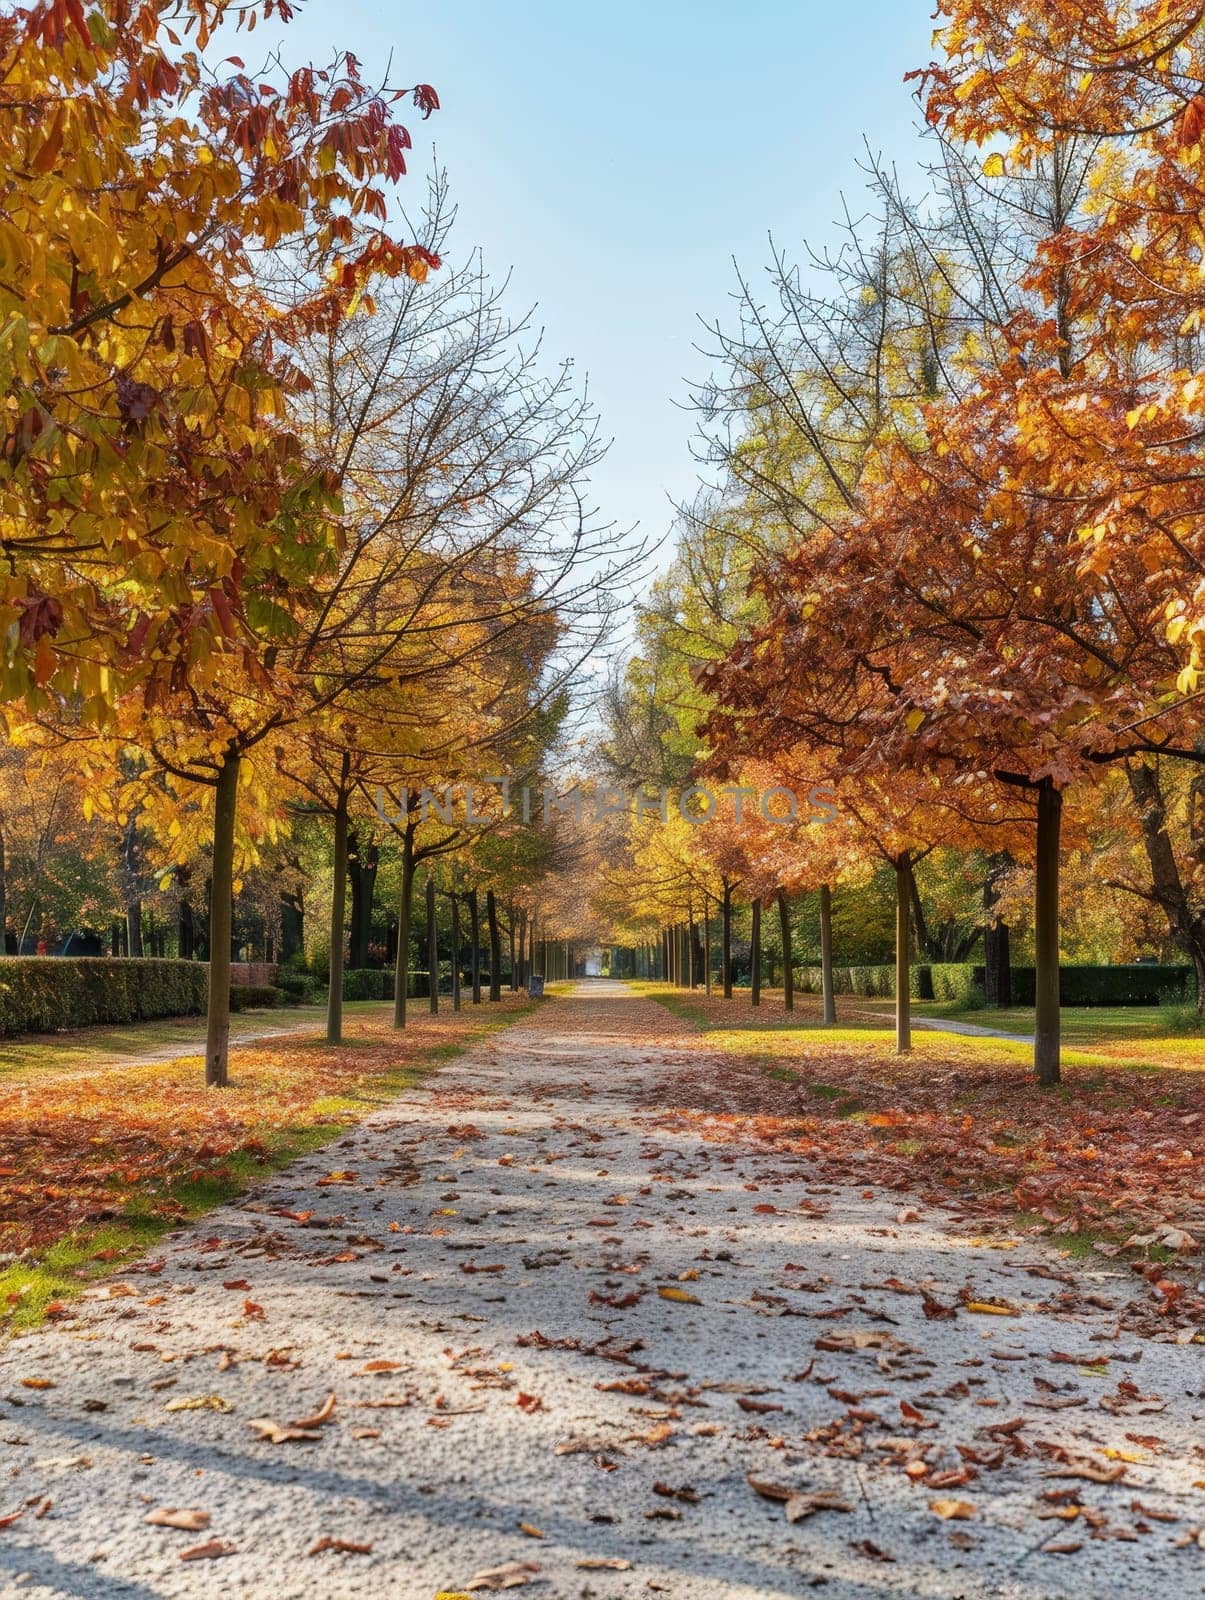 A tranquil park path is flanked by trees with autumnal foliage, their leaves forming a colorful carpet along the serene walkway.